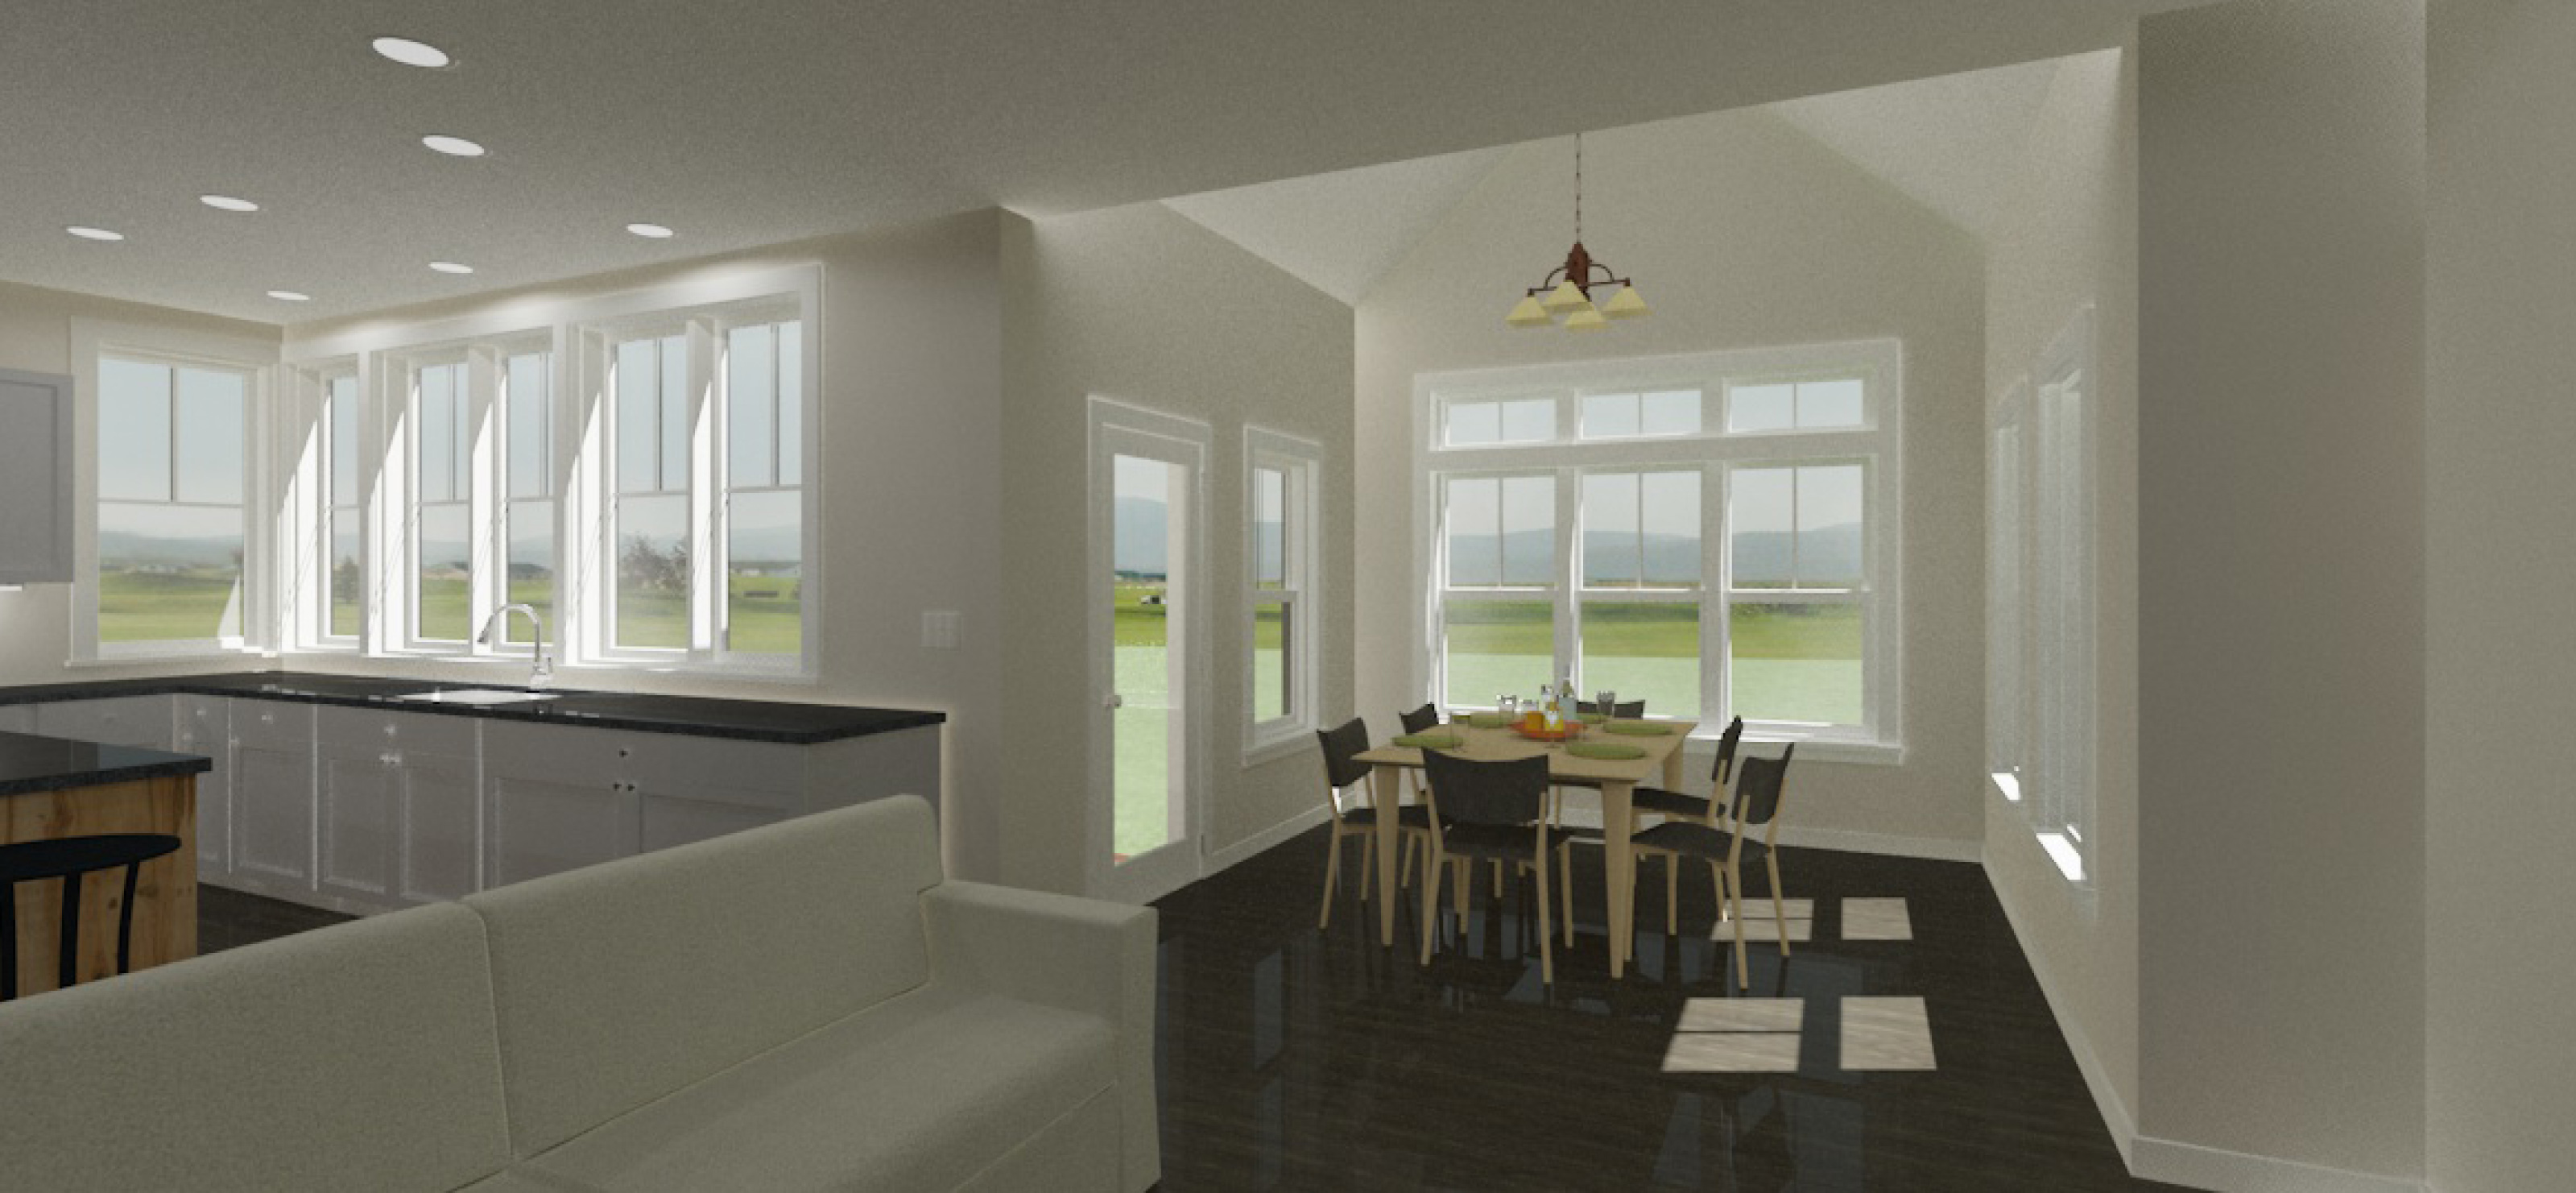 White Kitchen/Dining Room with Lots of Windows for natural light